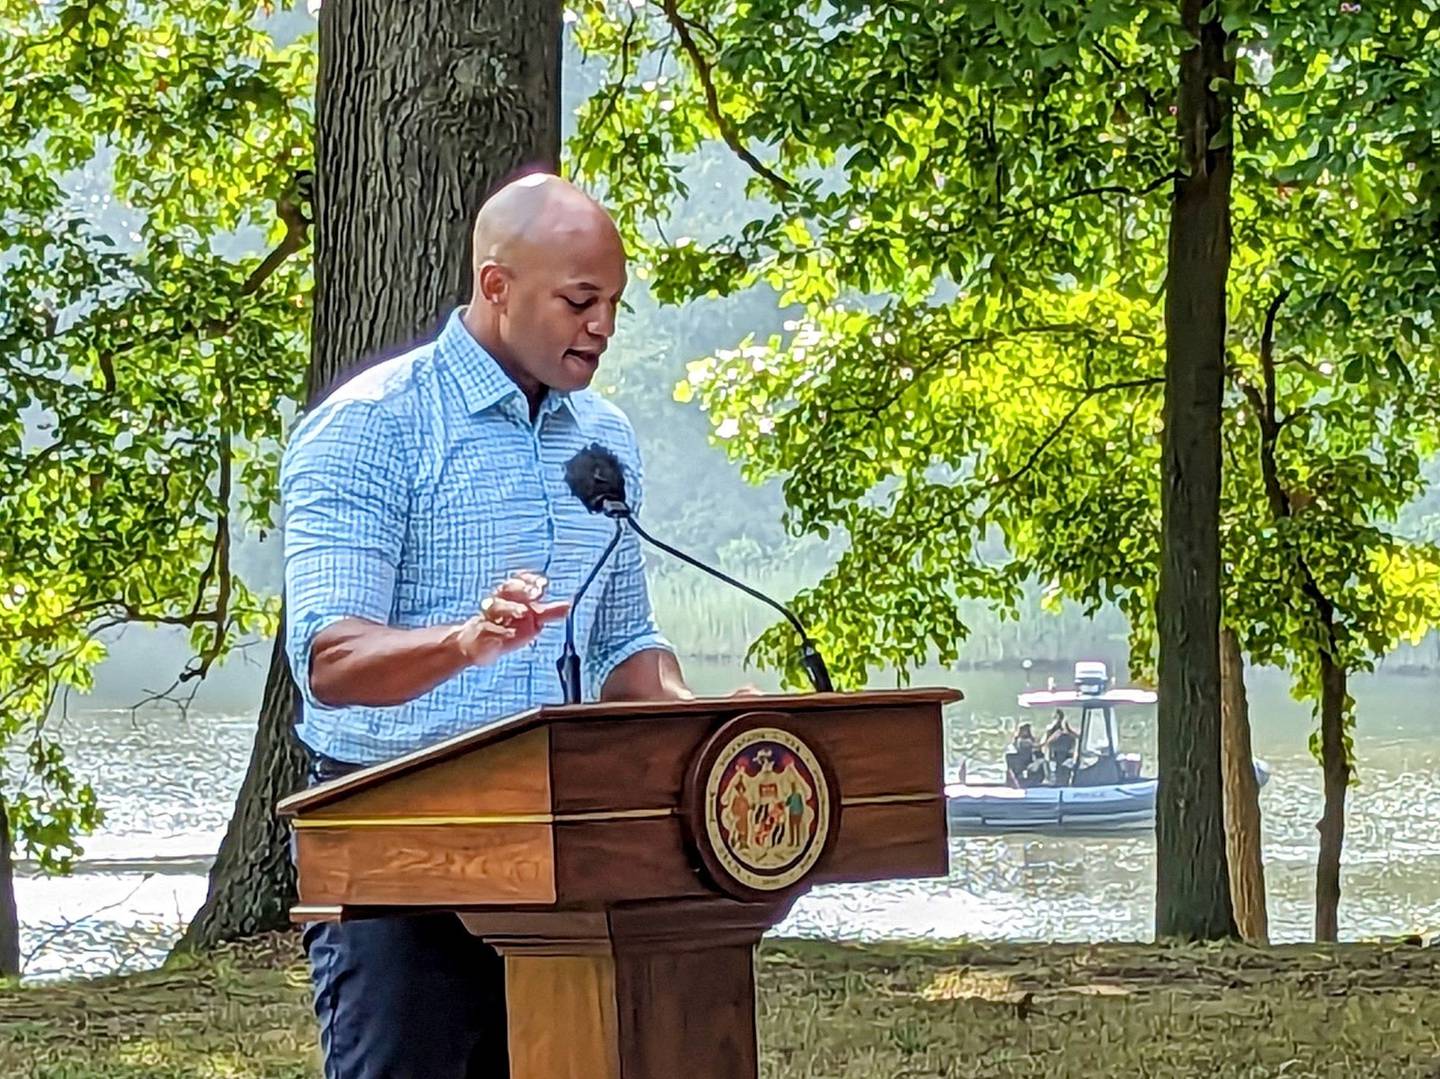 Gov. Wes Moore introduces a new focus for Chesapeake Bay clean-up efforts during an event at the Wye Island Natural Resources Management Area in Queenstown.